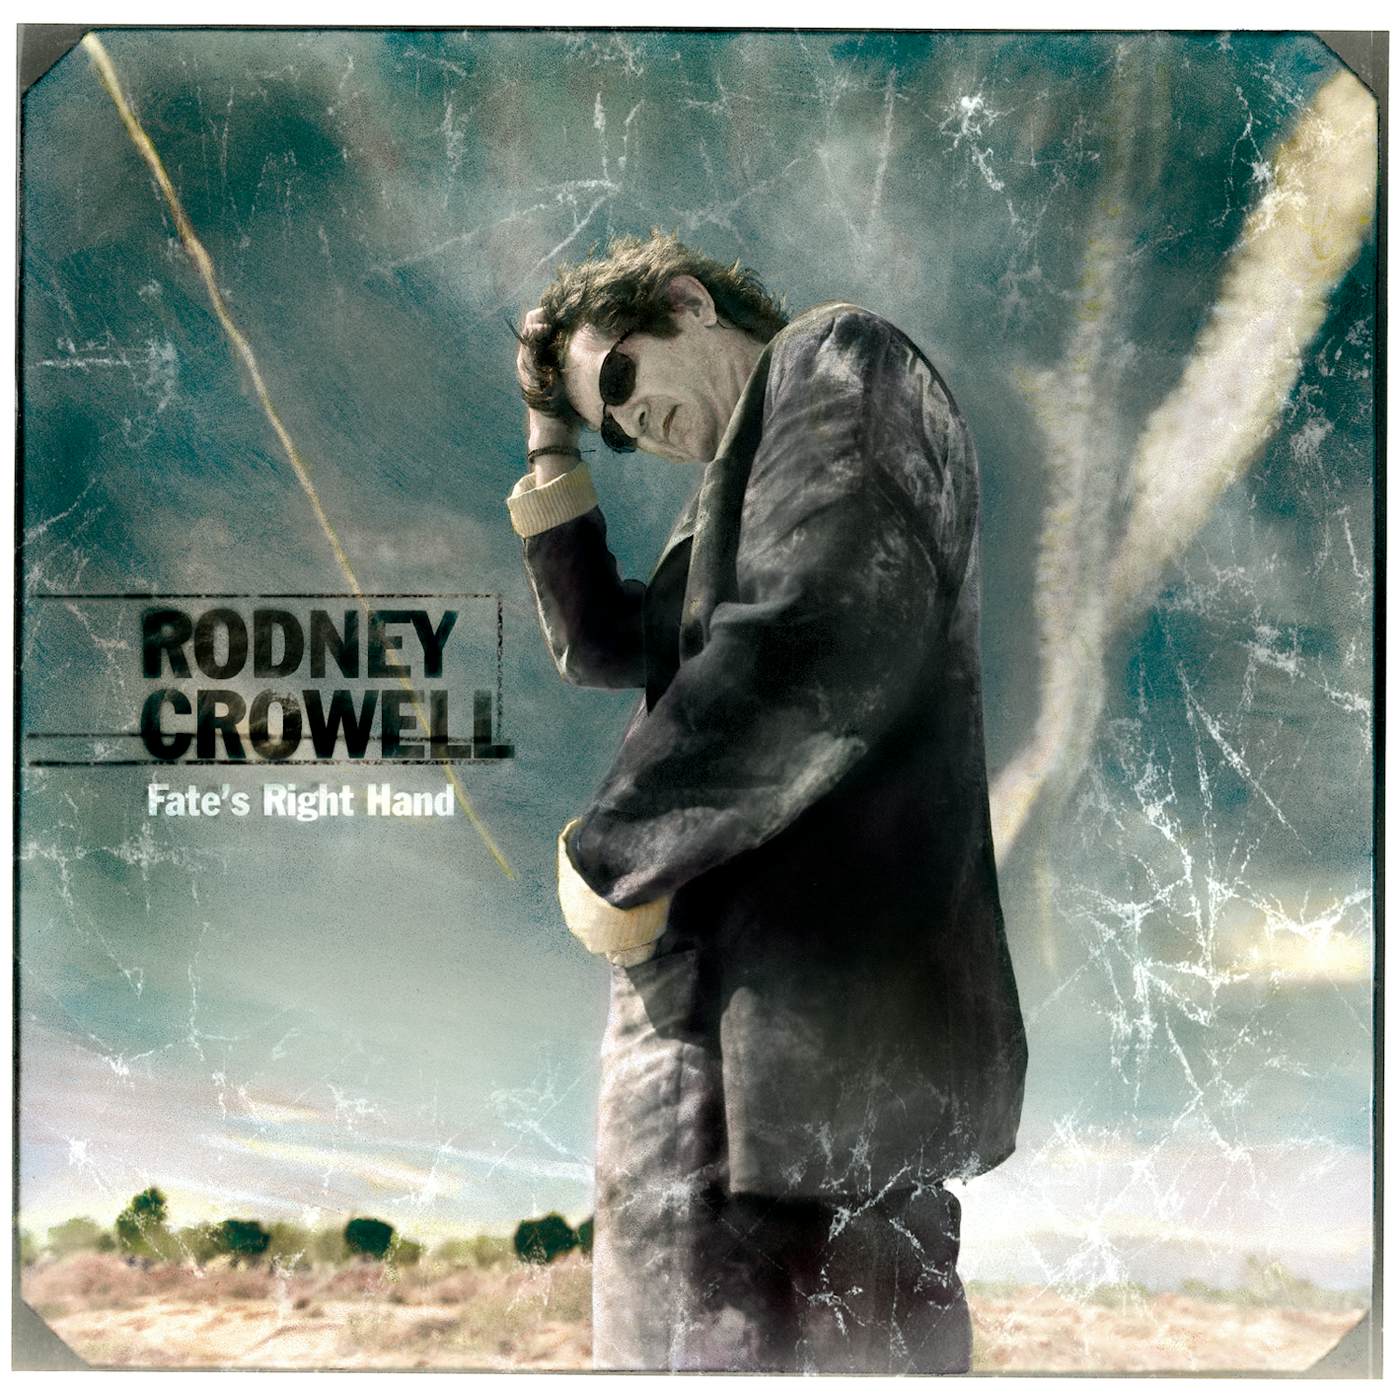 Rodney Crowell FATE'S RIGHT HAND CD